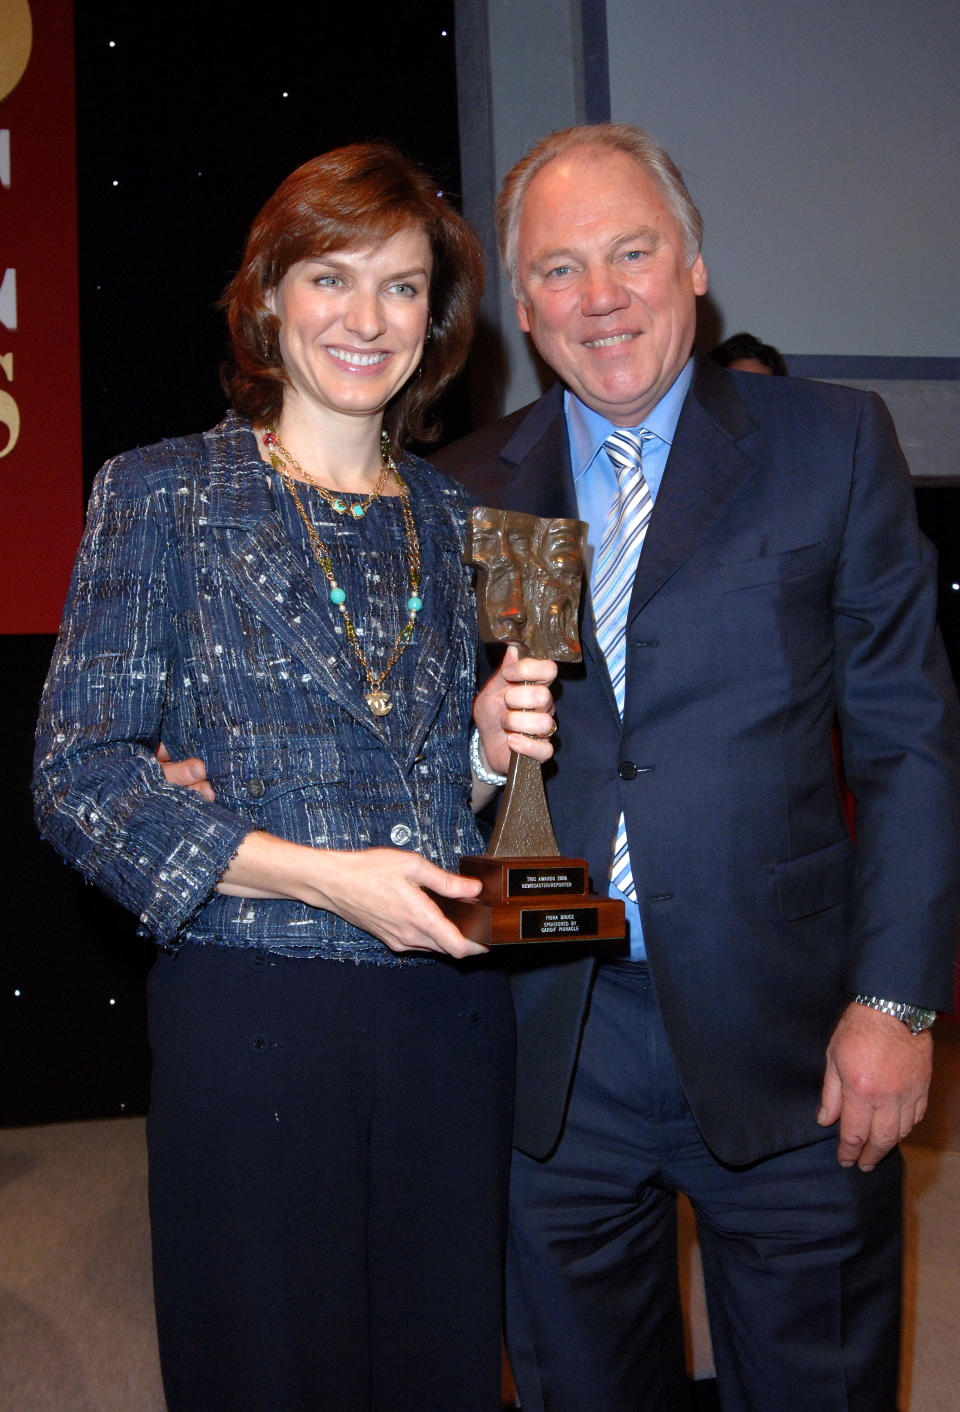 Peter Sissons and Fiona Bruce with her award for best TV Newscaster/Reporter, during the Television and Radio Industries Club (TRIC) Awards, at Grosvenor House, central London, Tuesday 7 March 2006. The awards honour performers and programmes and are voted for by radio and television personnel. PRESS ASSOCIATION Photo. Photo credit should read: Steve Parsons/PA   (Photo by Steve Parsons - PA Images/PA Images via Getty Images)